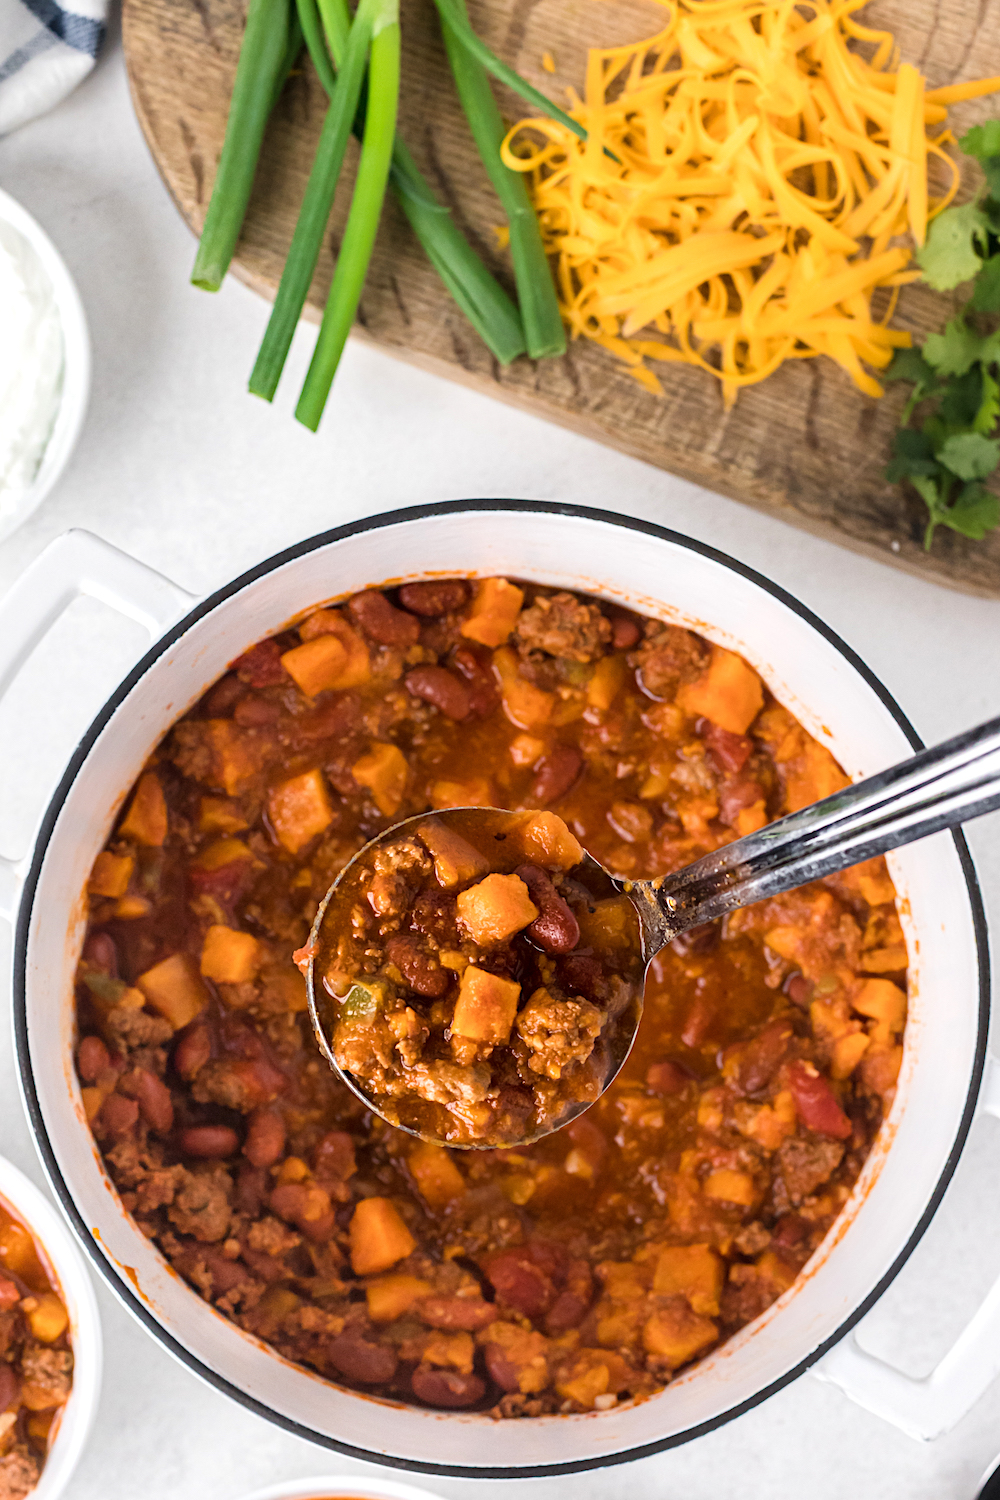 Chili made with ground turkey and sweet potatoes